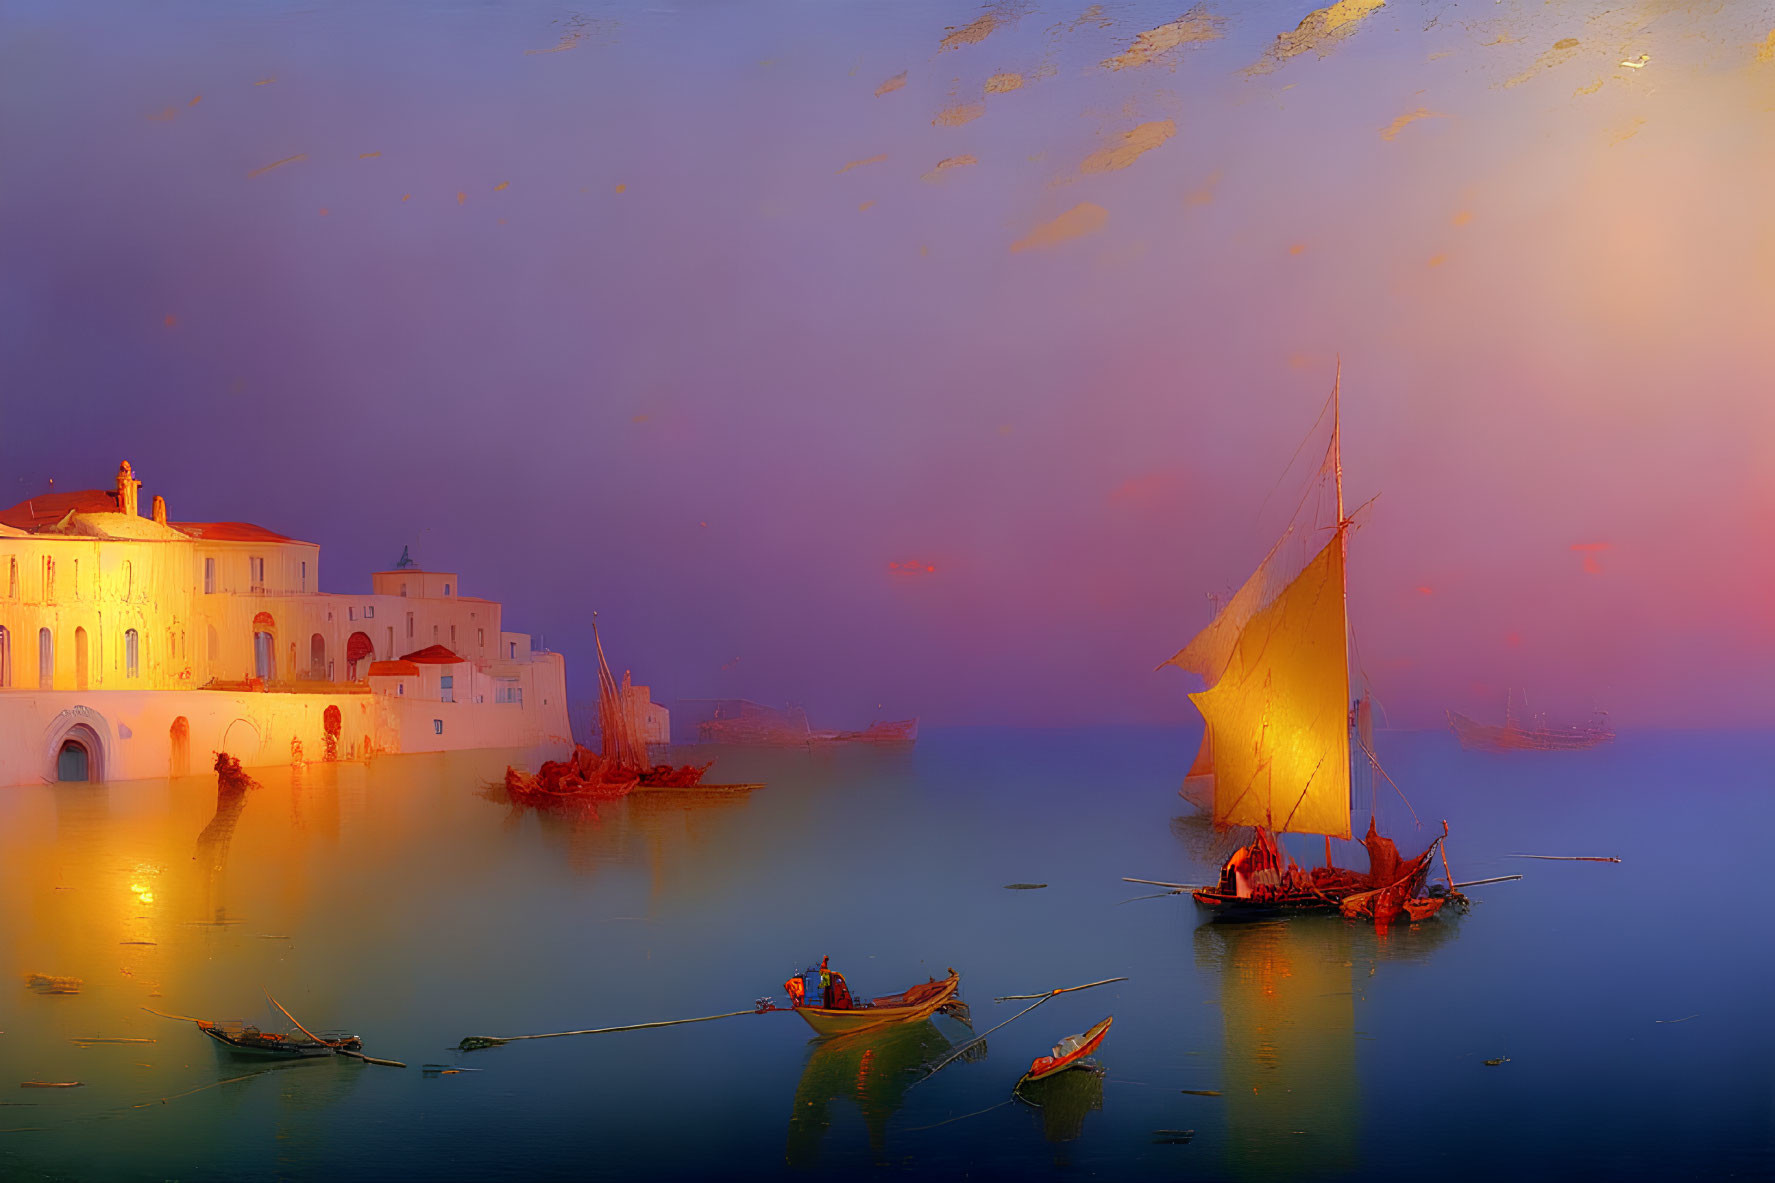 Tranquil harbor at dusk with boats and golden sailboat in serene sunset scene